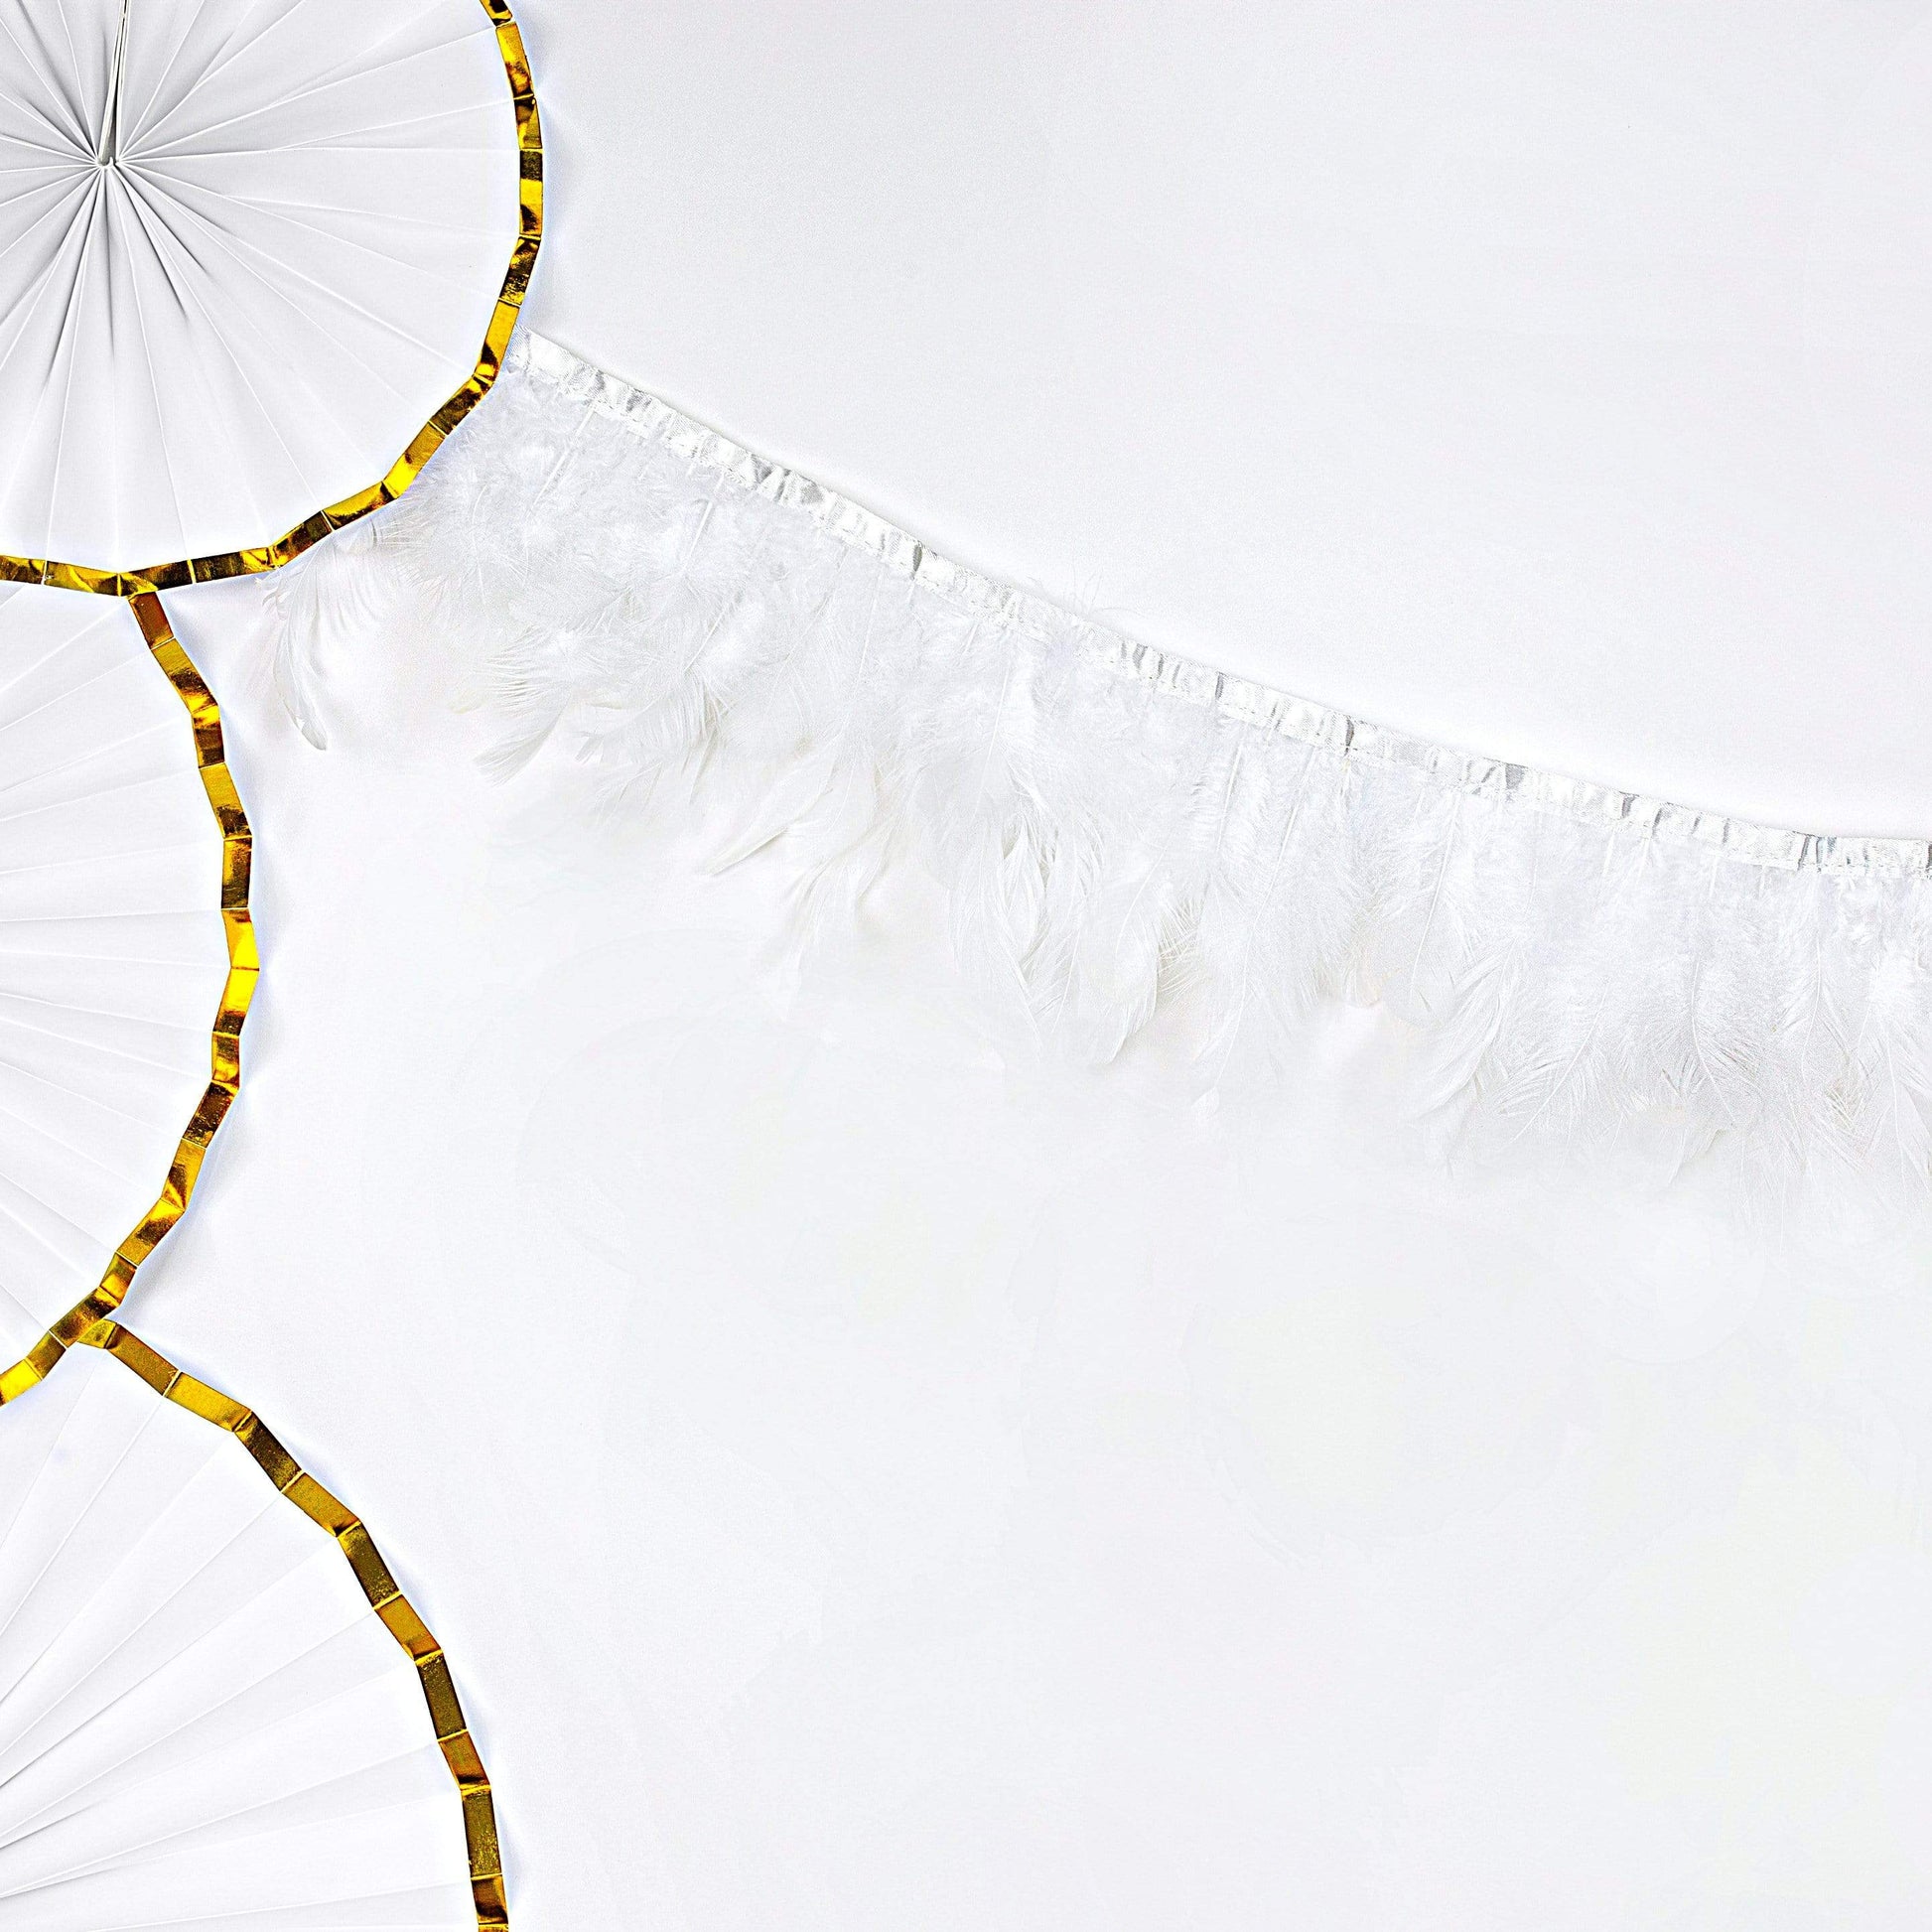 White Feather Garland | Feather Party Supplies UK Party Deco